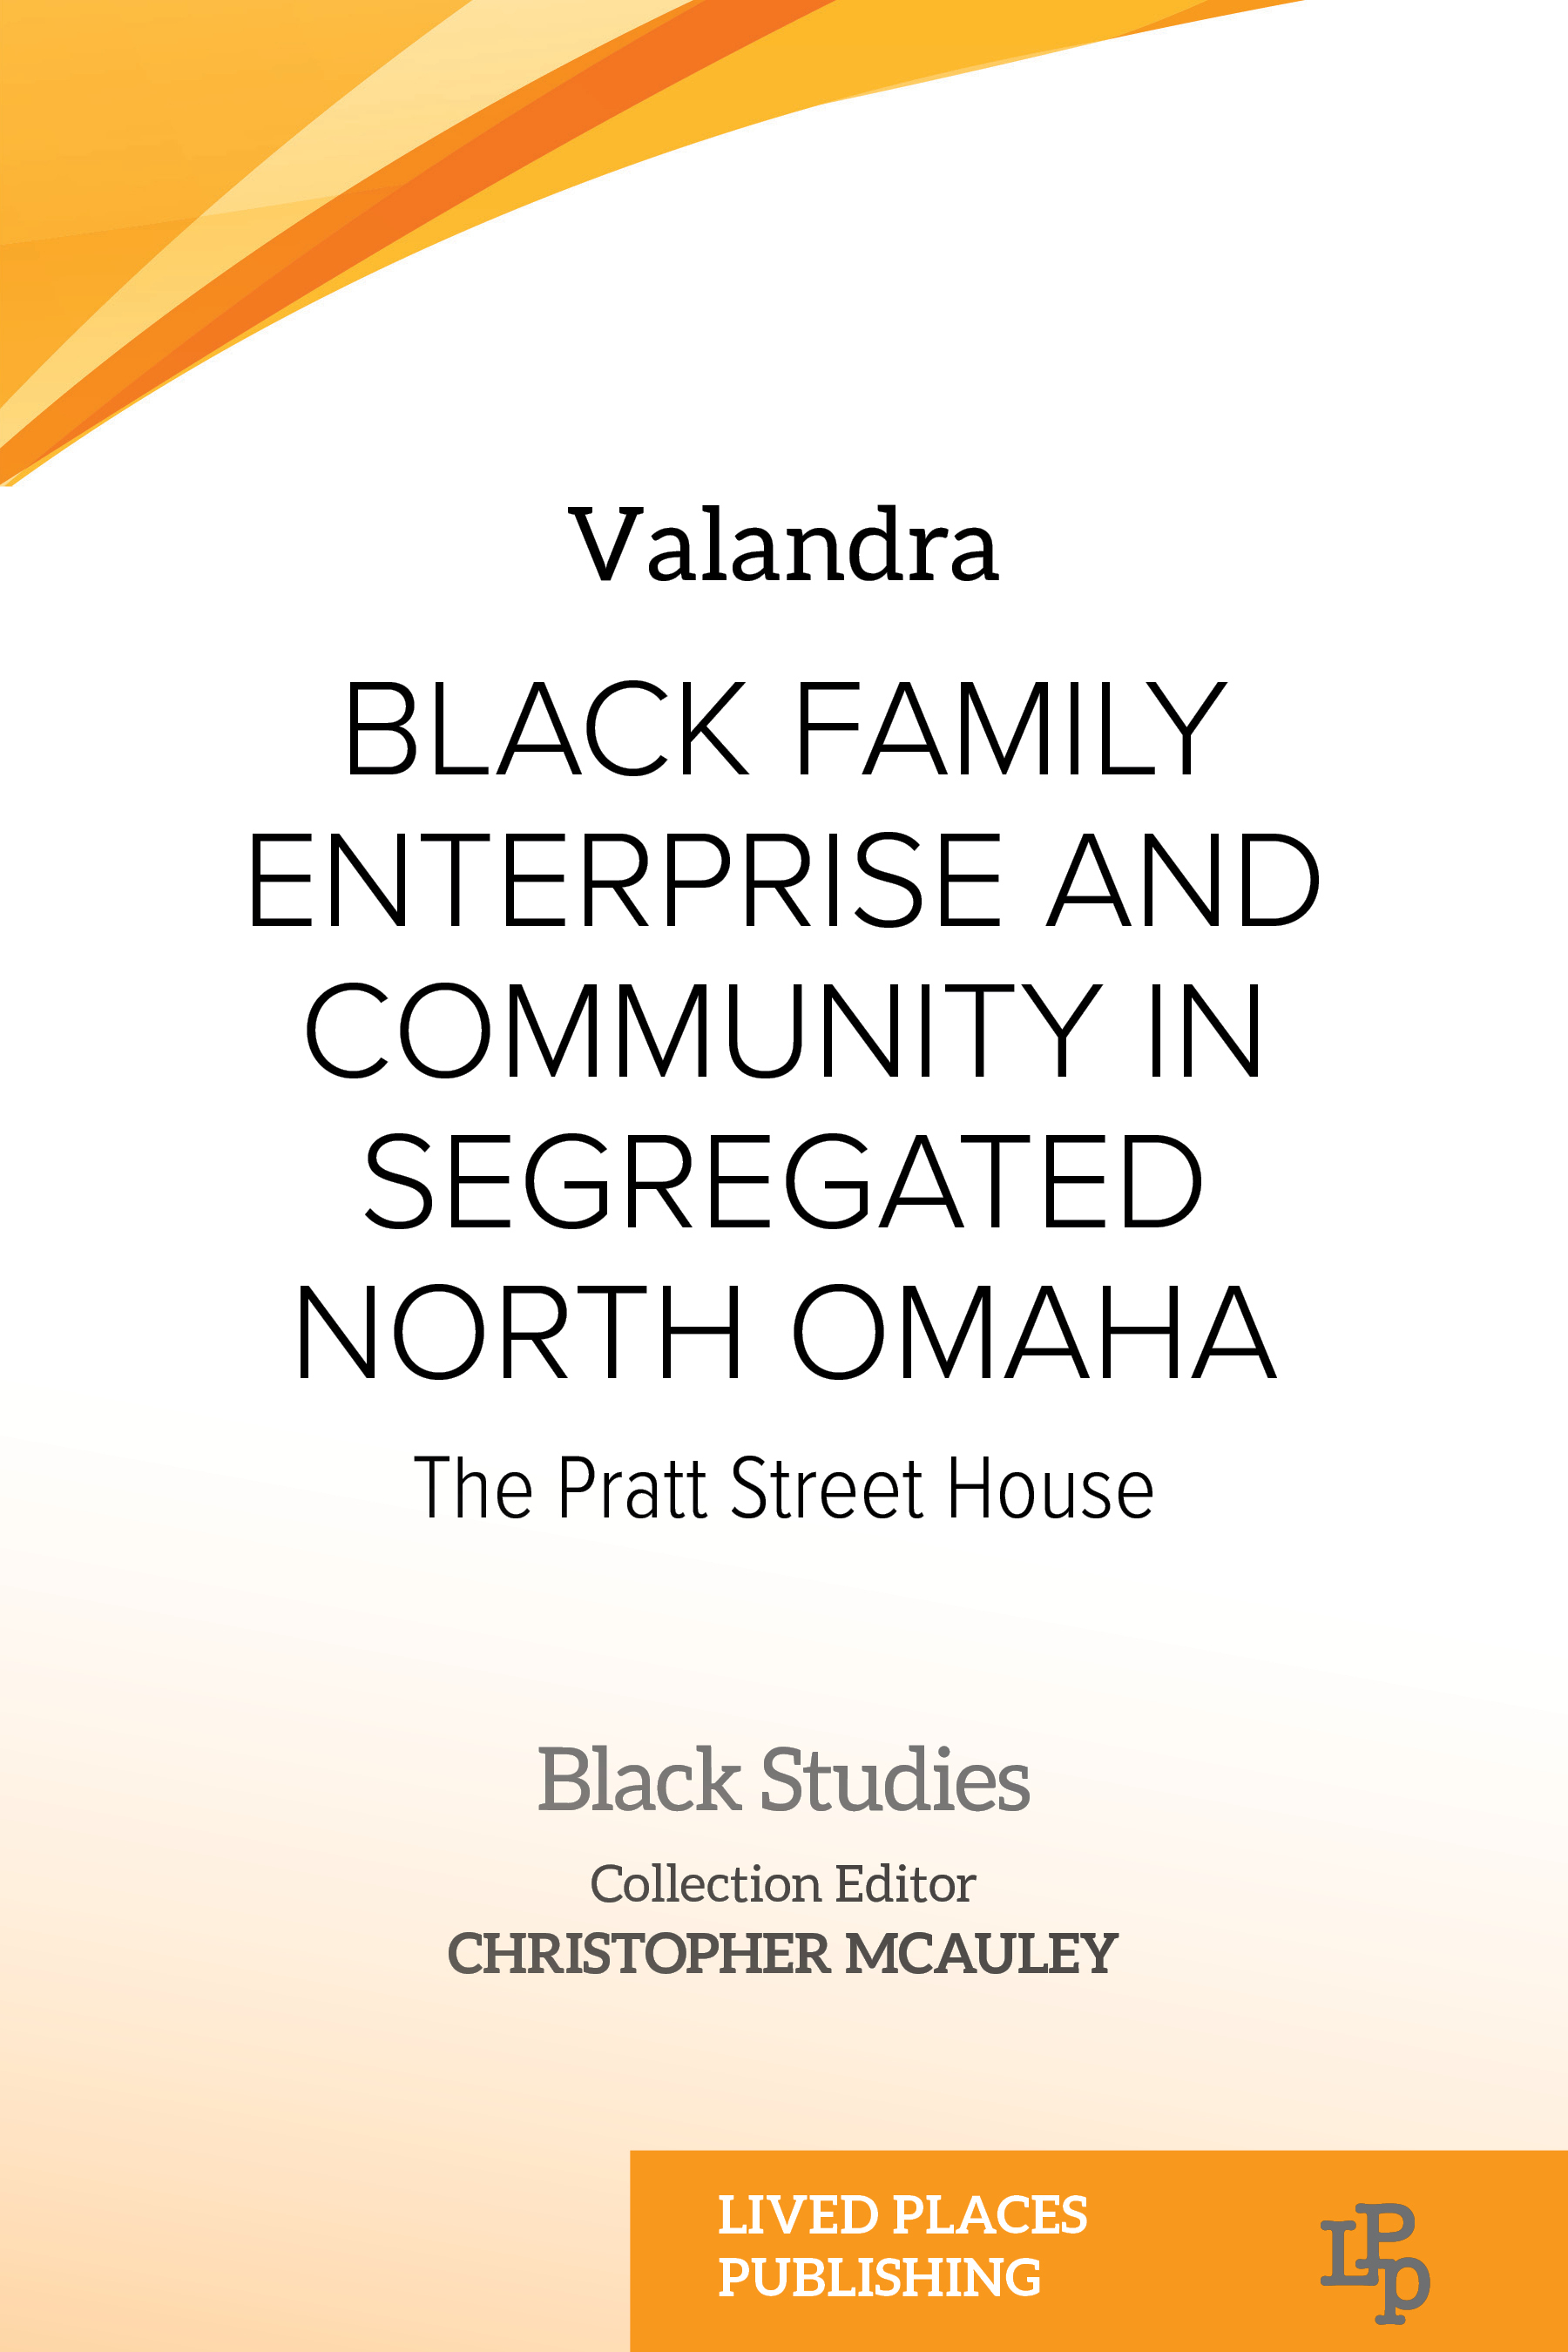 Black Family Enterprise and Community in Segregated North Omaha